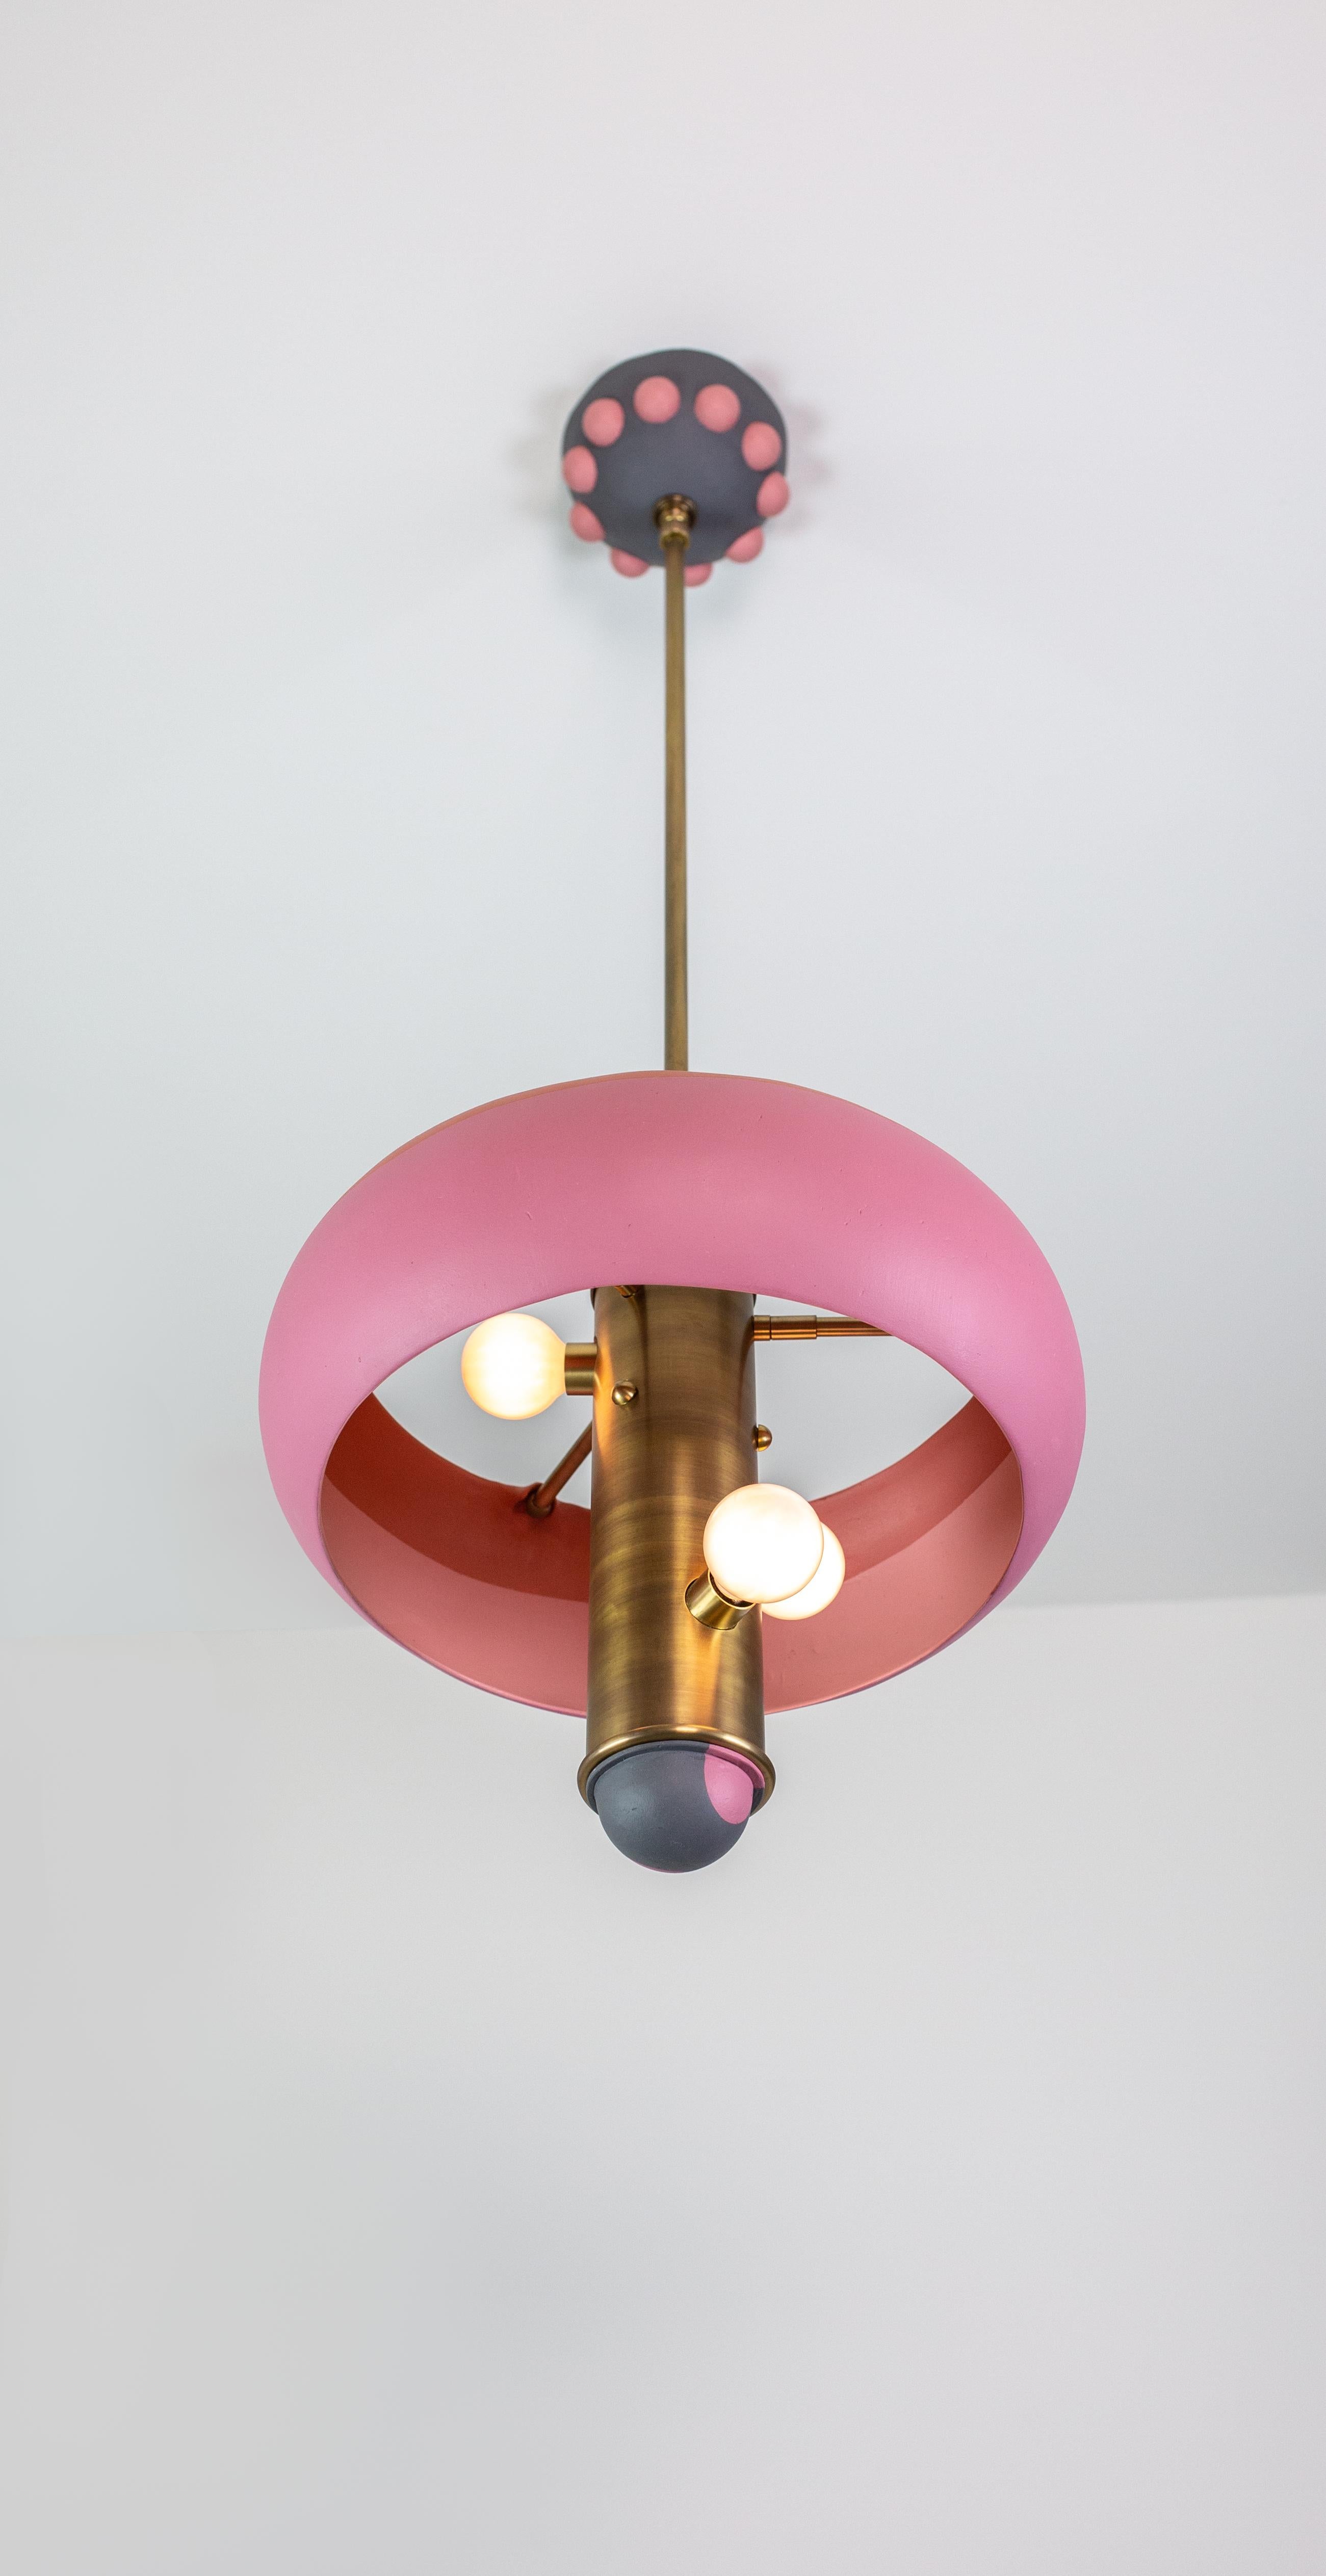 Stephanie is a pendant light, part of the Posse collection, a system designed around the core ideas of collaboration and play.

The pendant is created to give the customer freedom in tailoring their own expression. The design is centered around a